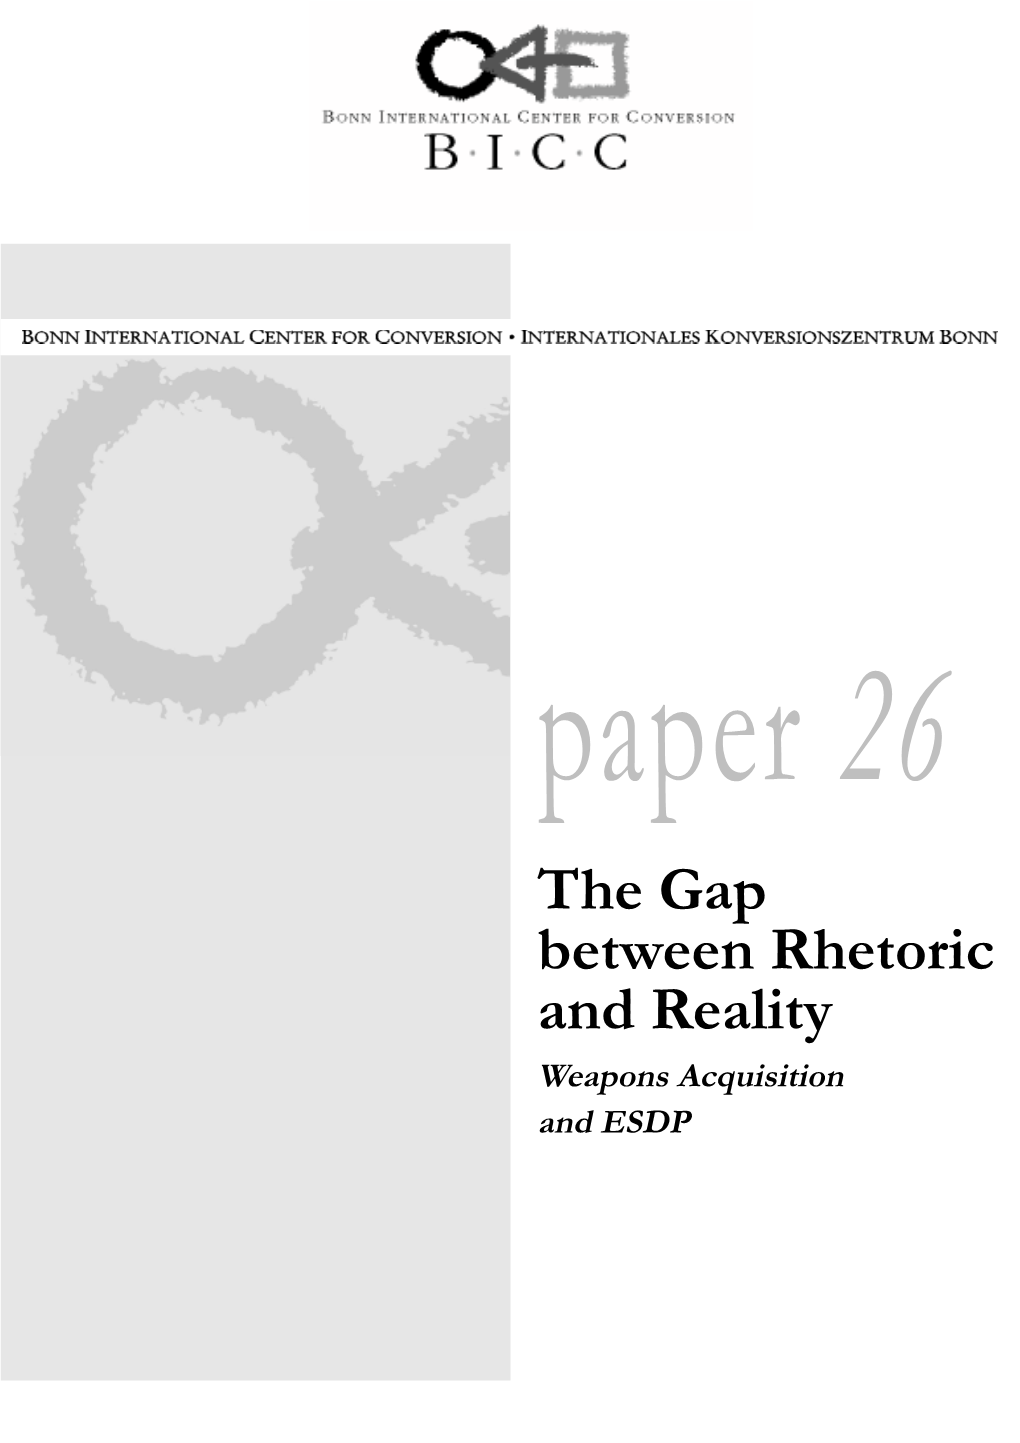 The Gap Between Rhetoric and Reality Weapons Acquisition and ESDP the Gap Between Rhetoric and Reality